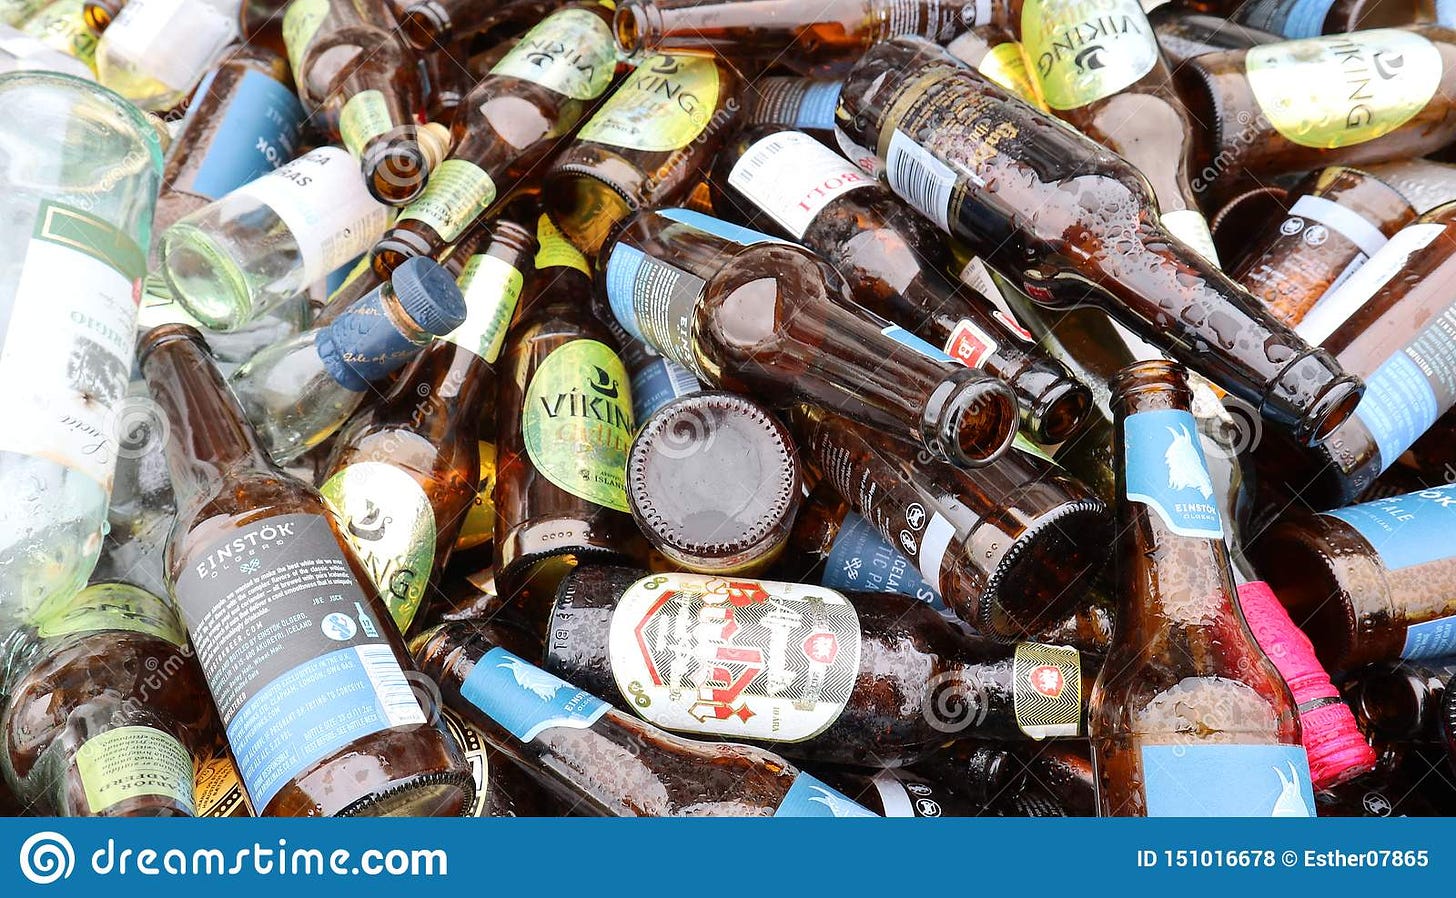 A Pile Of Empty Beer Bottles Editorial Stock Photo - Image of damaged,  pile: 151016678